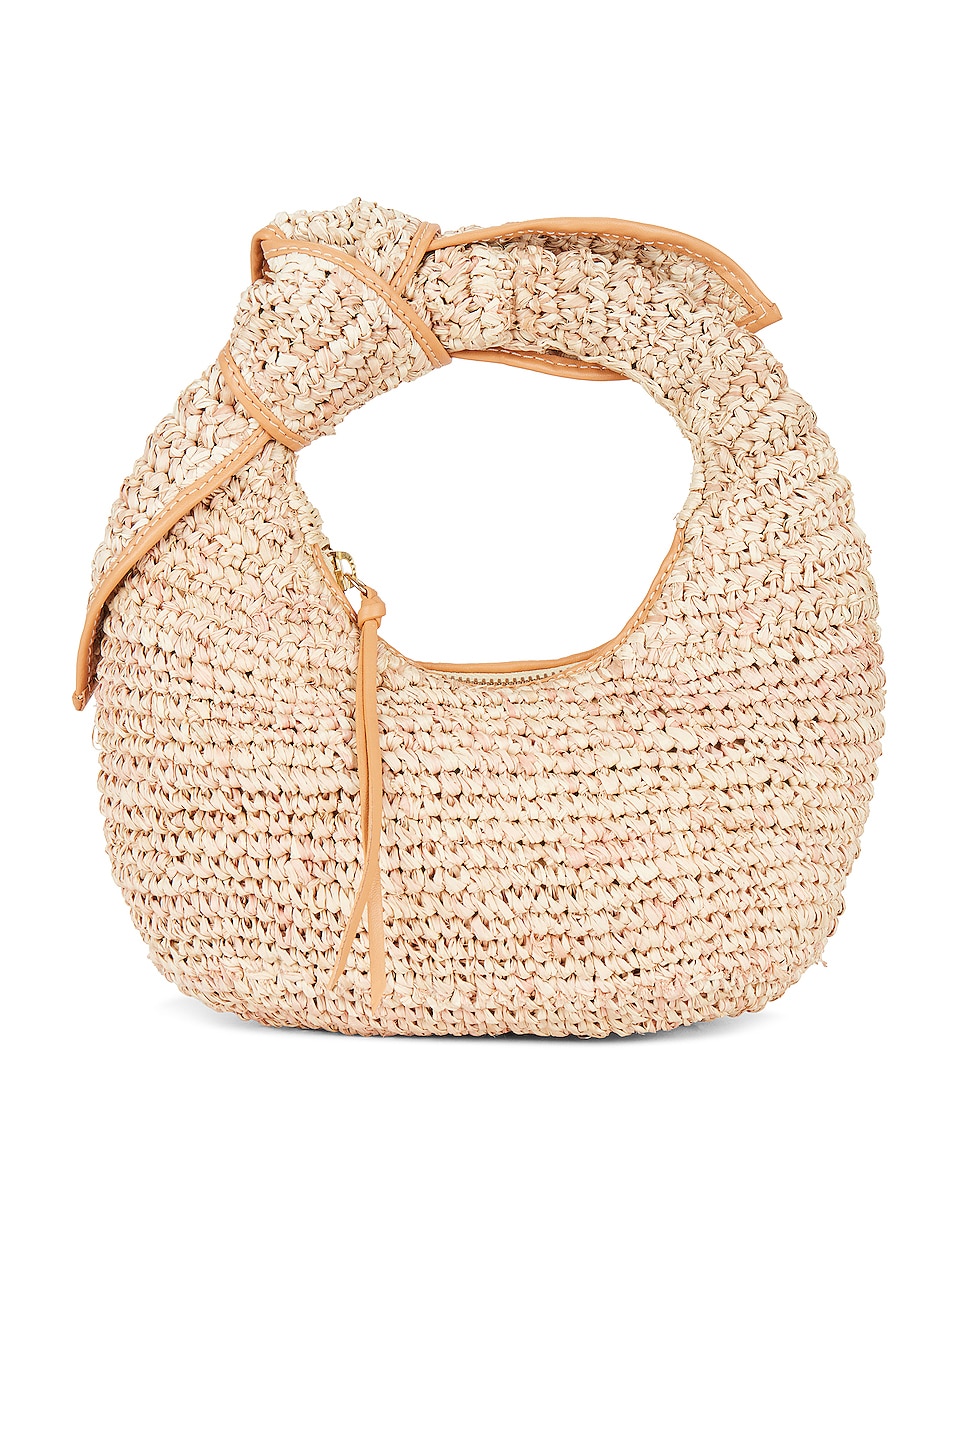  Josie Knot Bag in Mixed Natural | REVOLVE